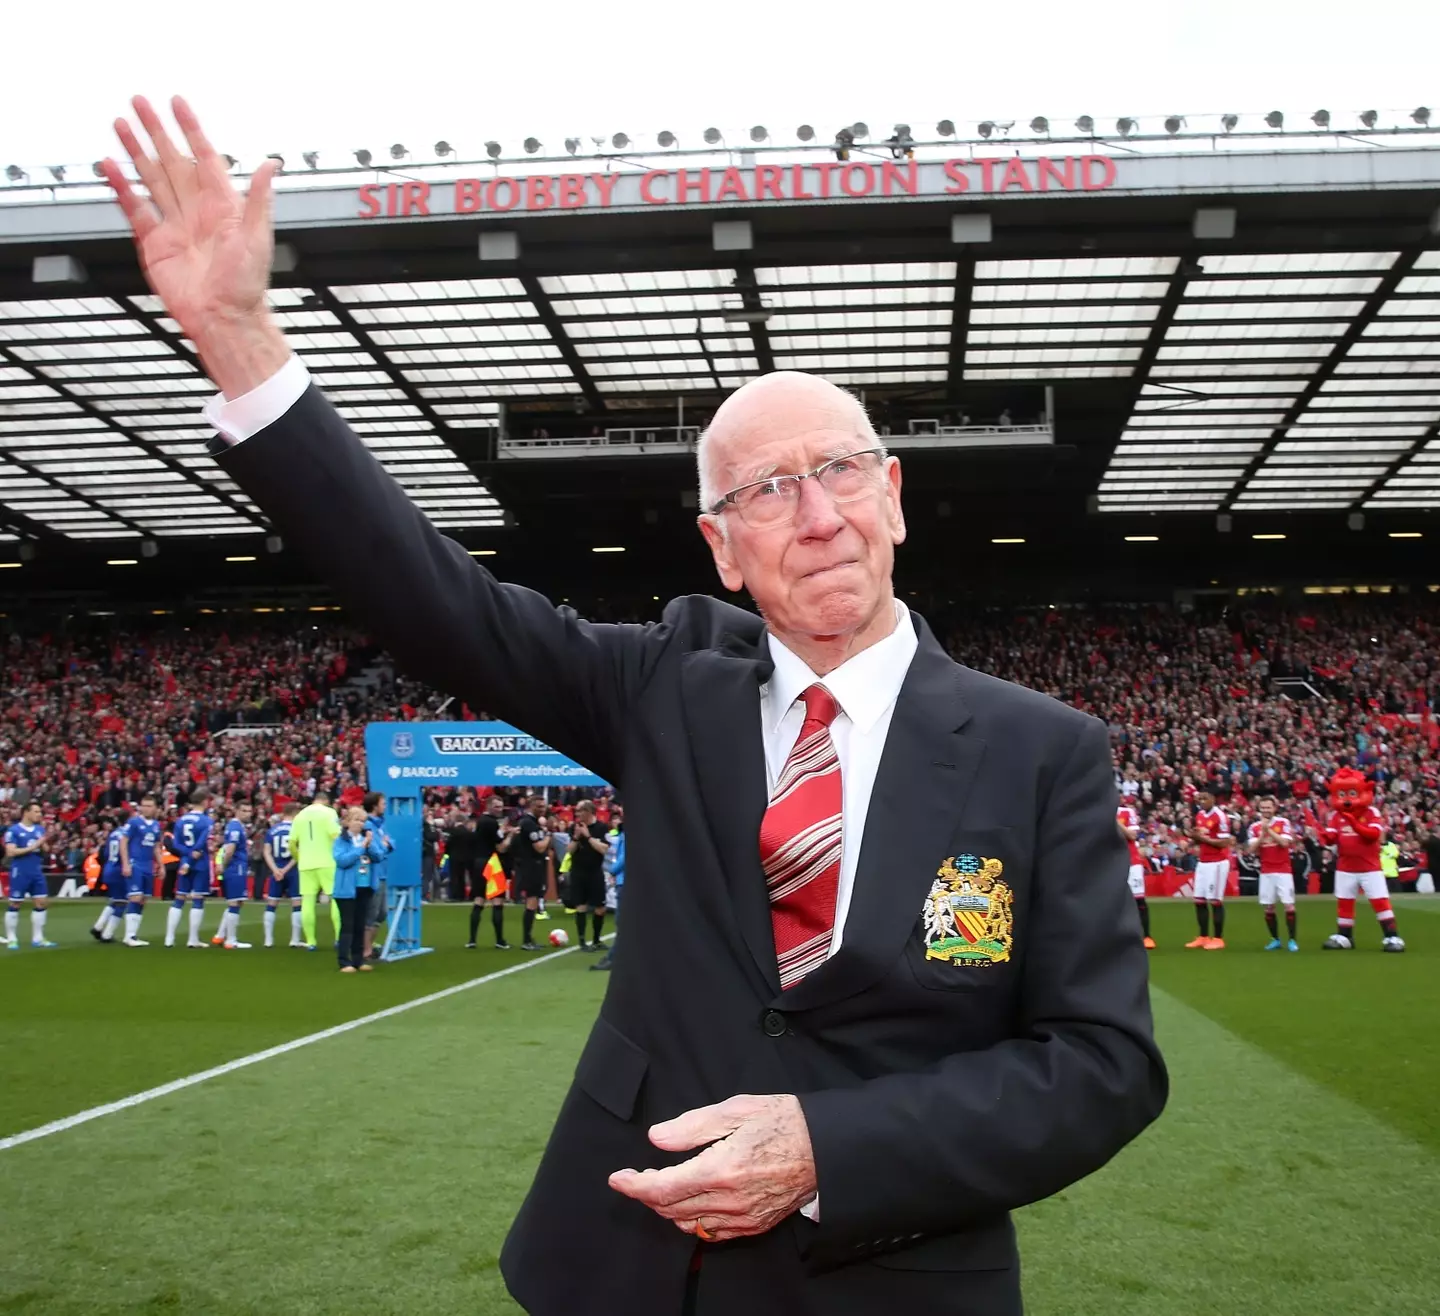 Sir Bobby Charlton's legacy will live on long after his death.